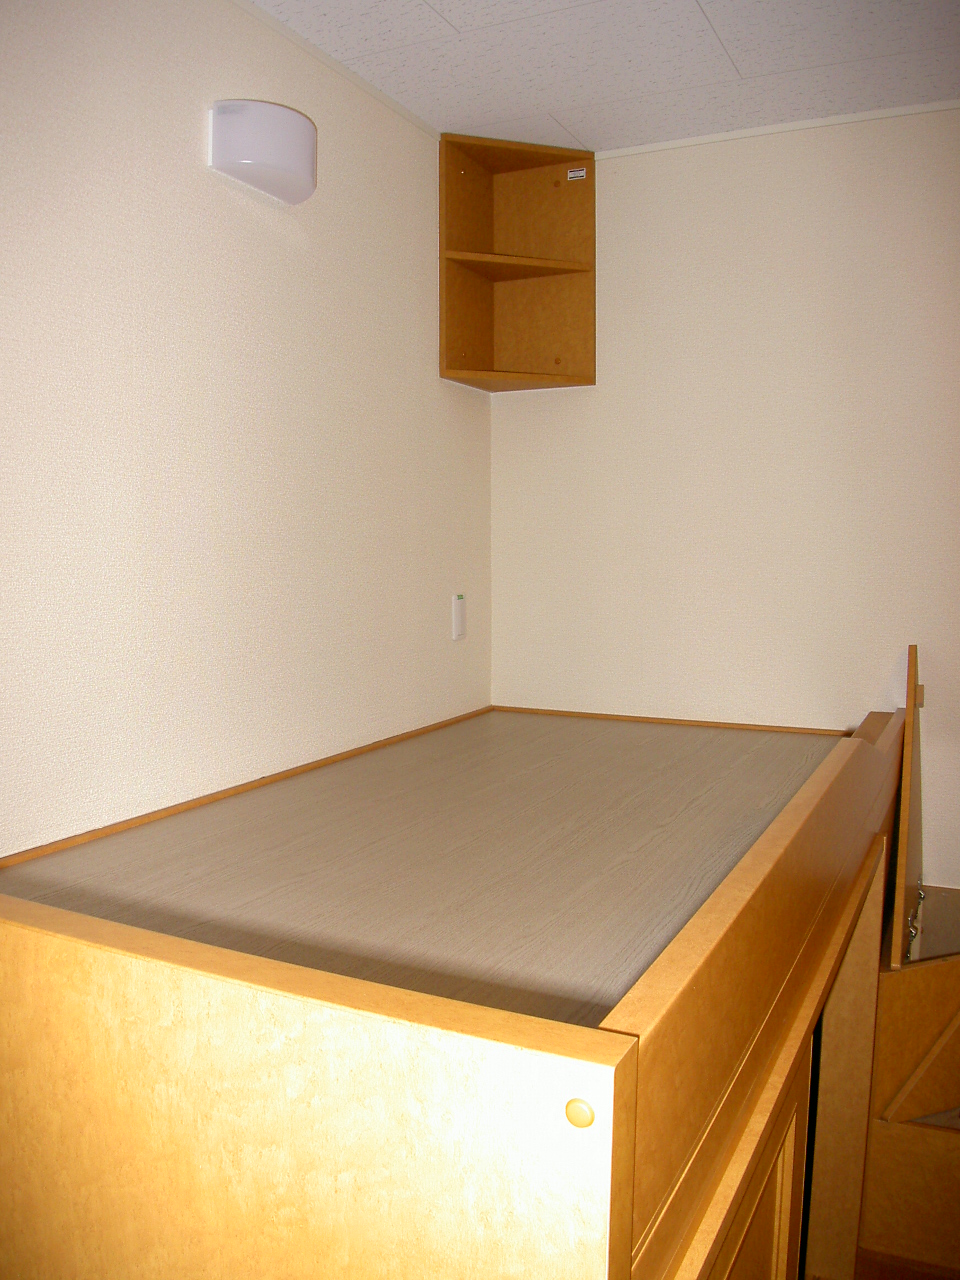 Other Equipment. Bed (the lower receiving)